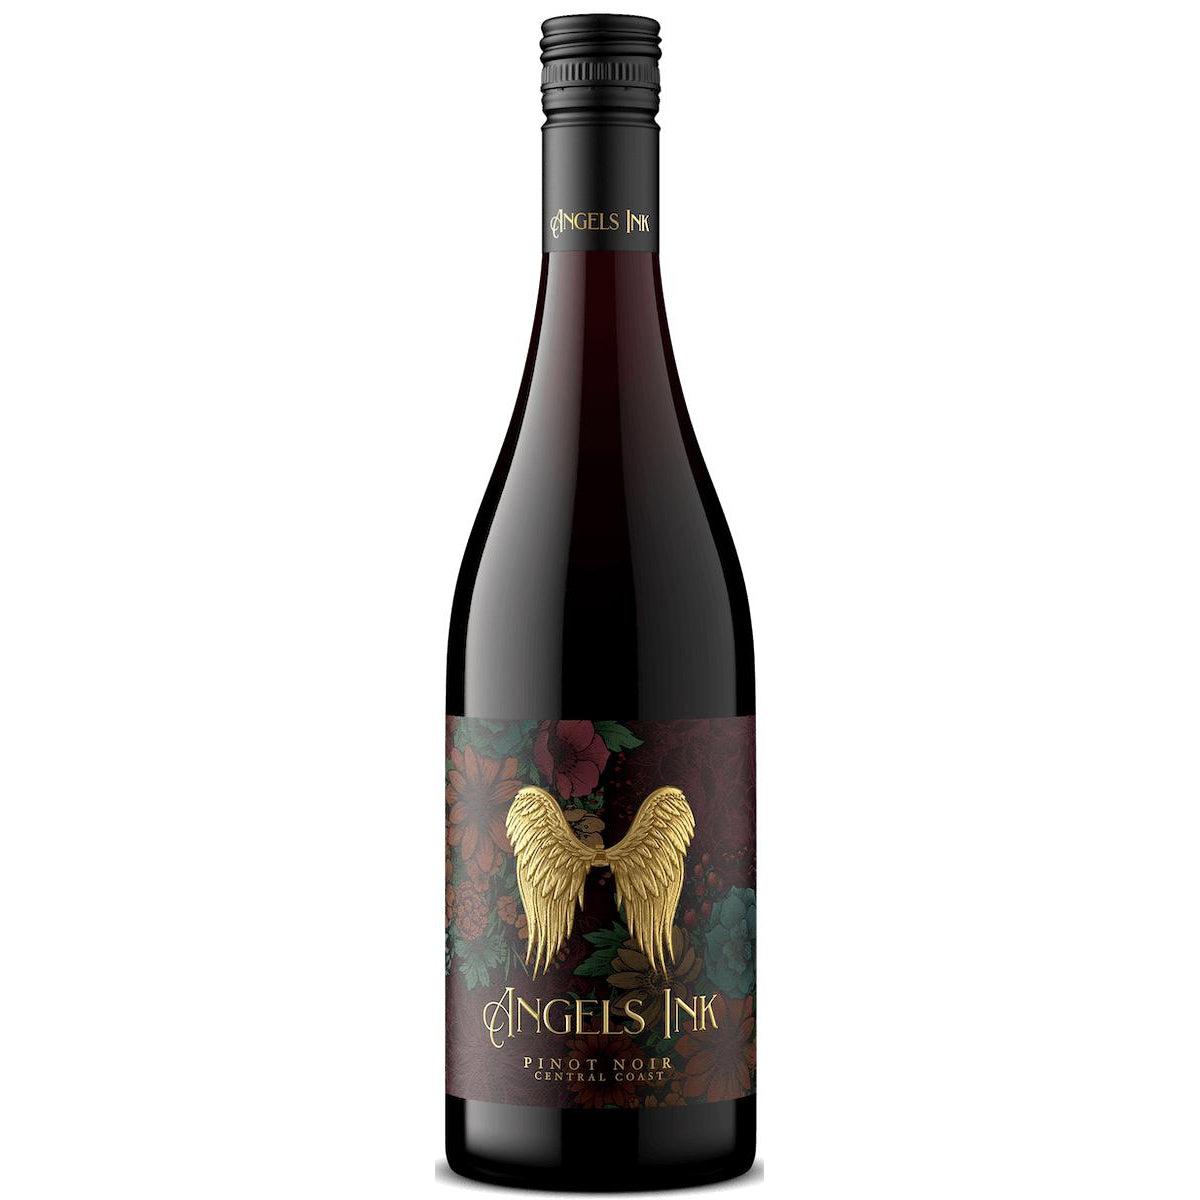 Angels Ink Pinot Noir Central Coast 2018